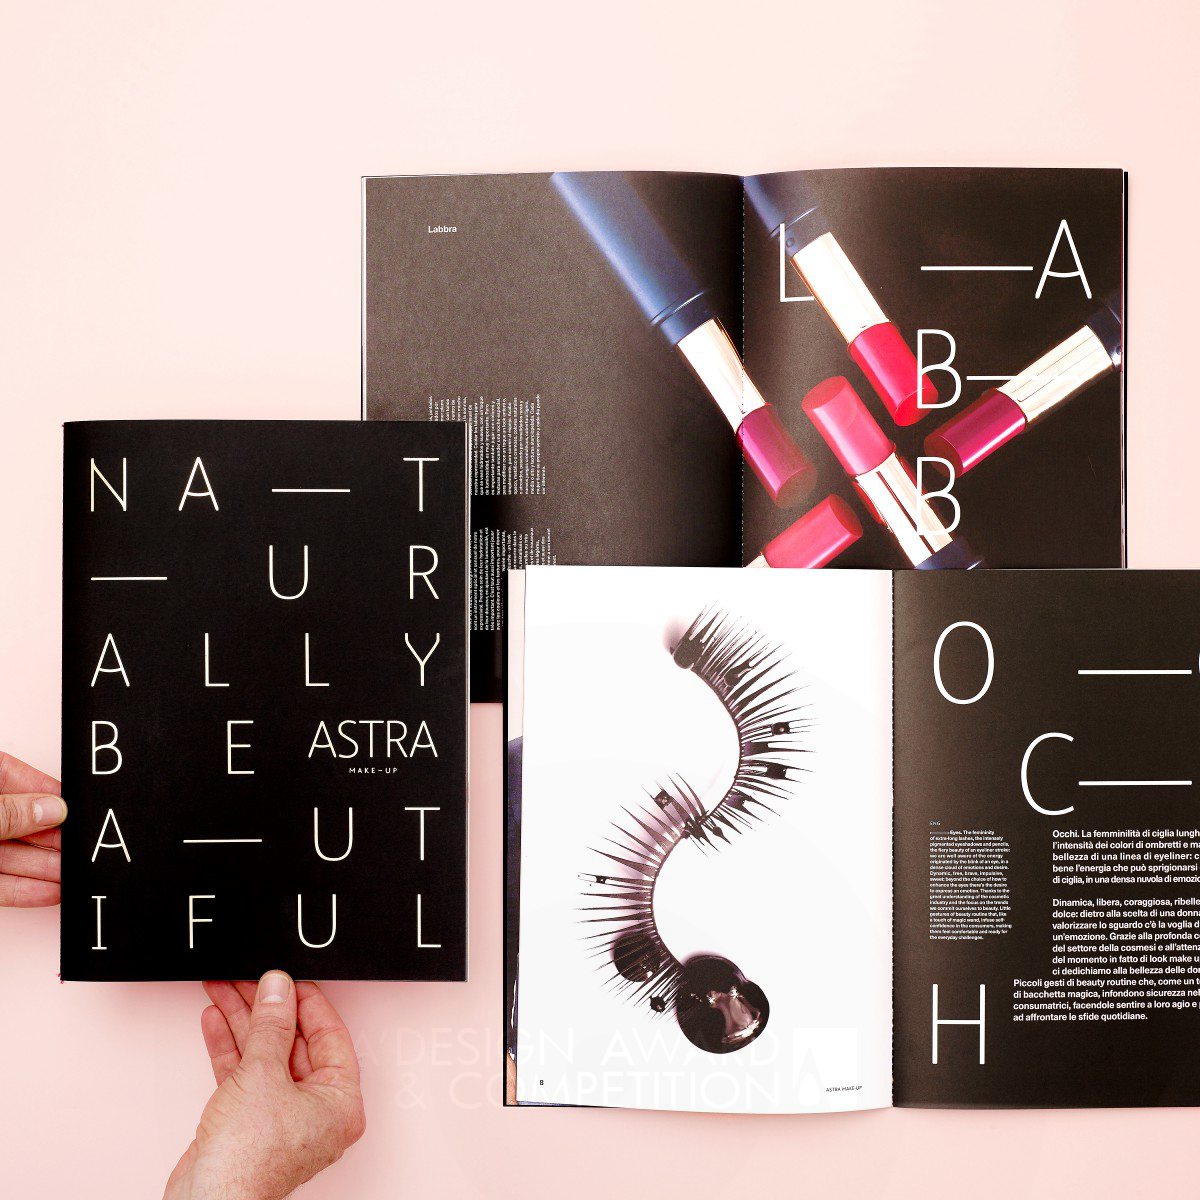 Astra Make-up Company Re-branding by Paul Robb